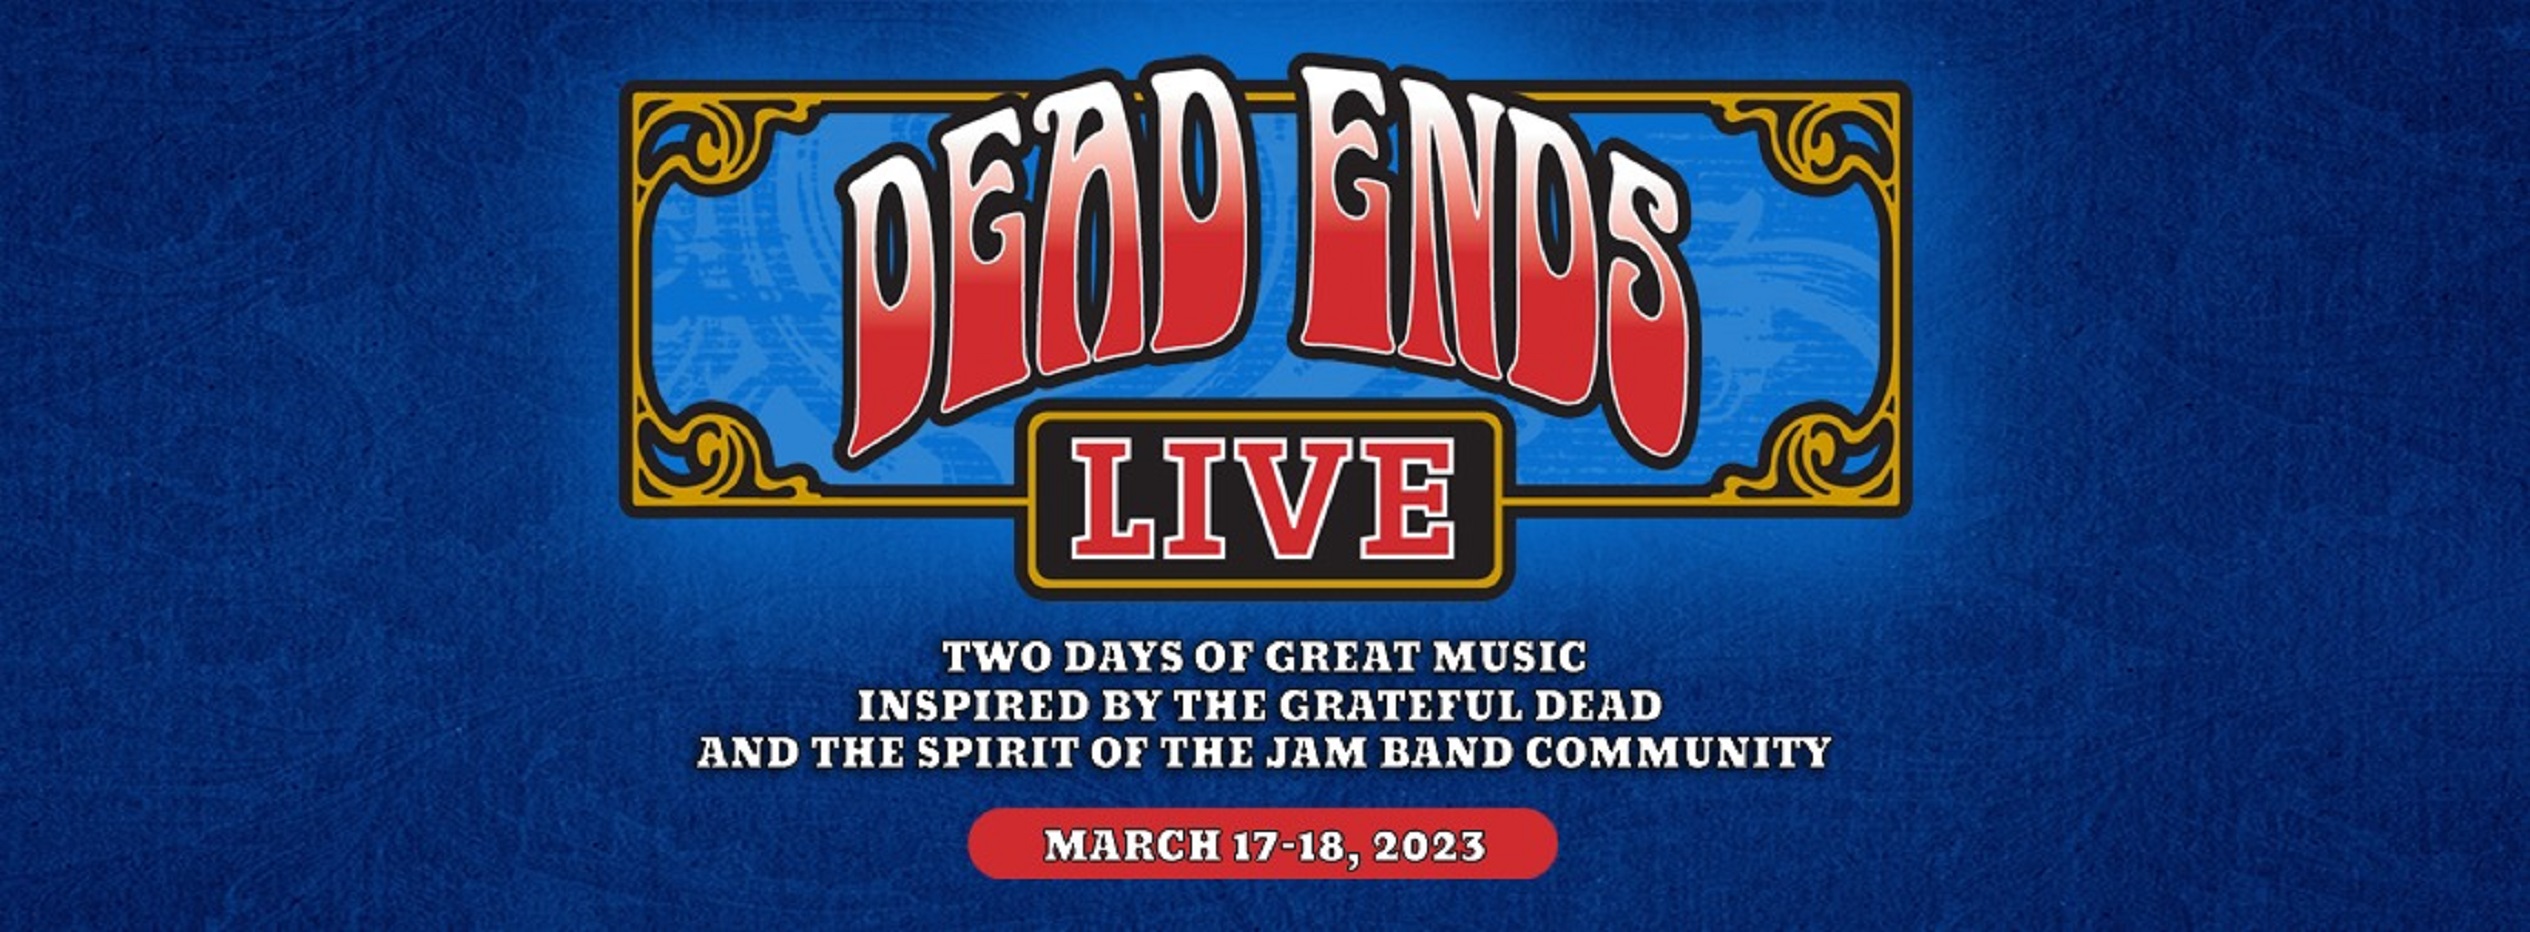 The weekend of March 17TH and 18TH, 2023, marks the return of Edmonton’s newest winter music festival, Dead Ends Live